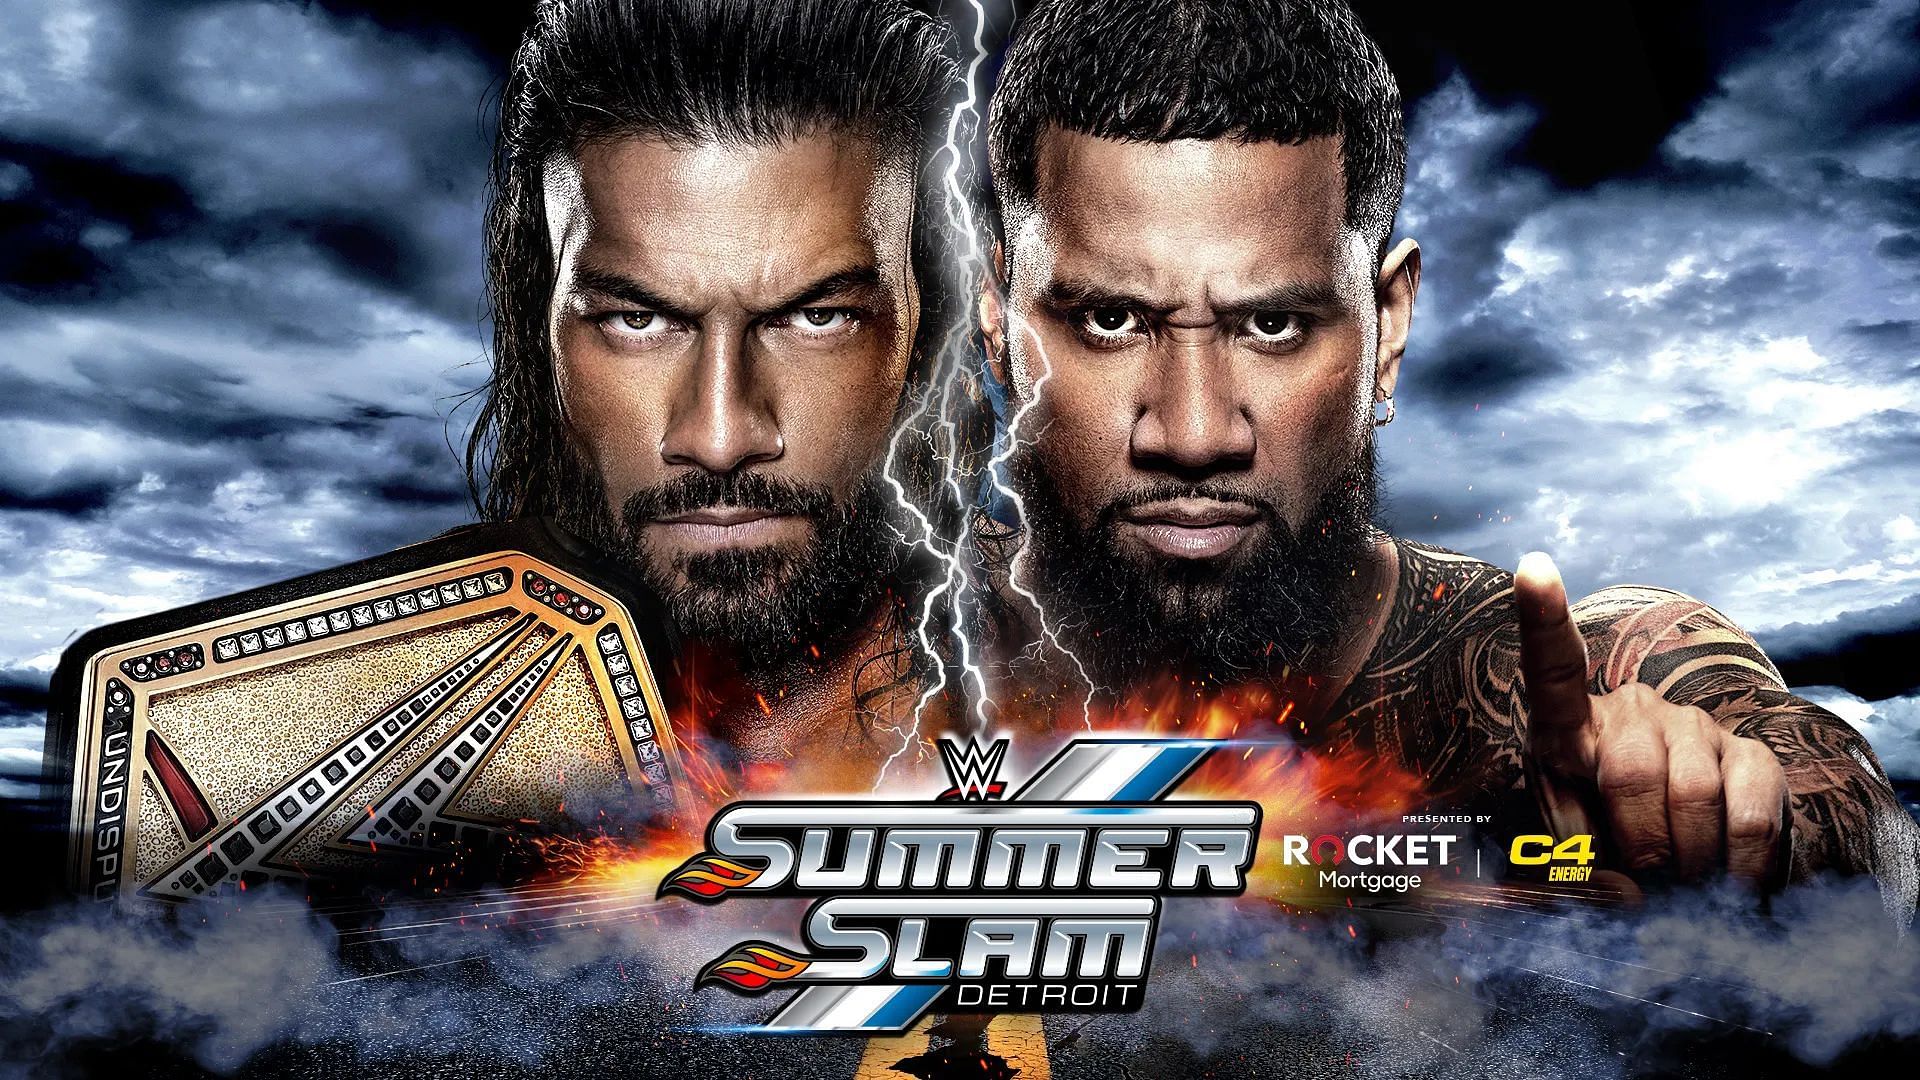 Will Roman Reigns leave SummerSlam as Champion?